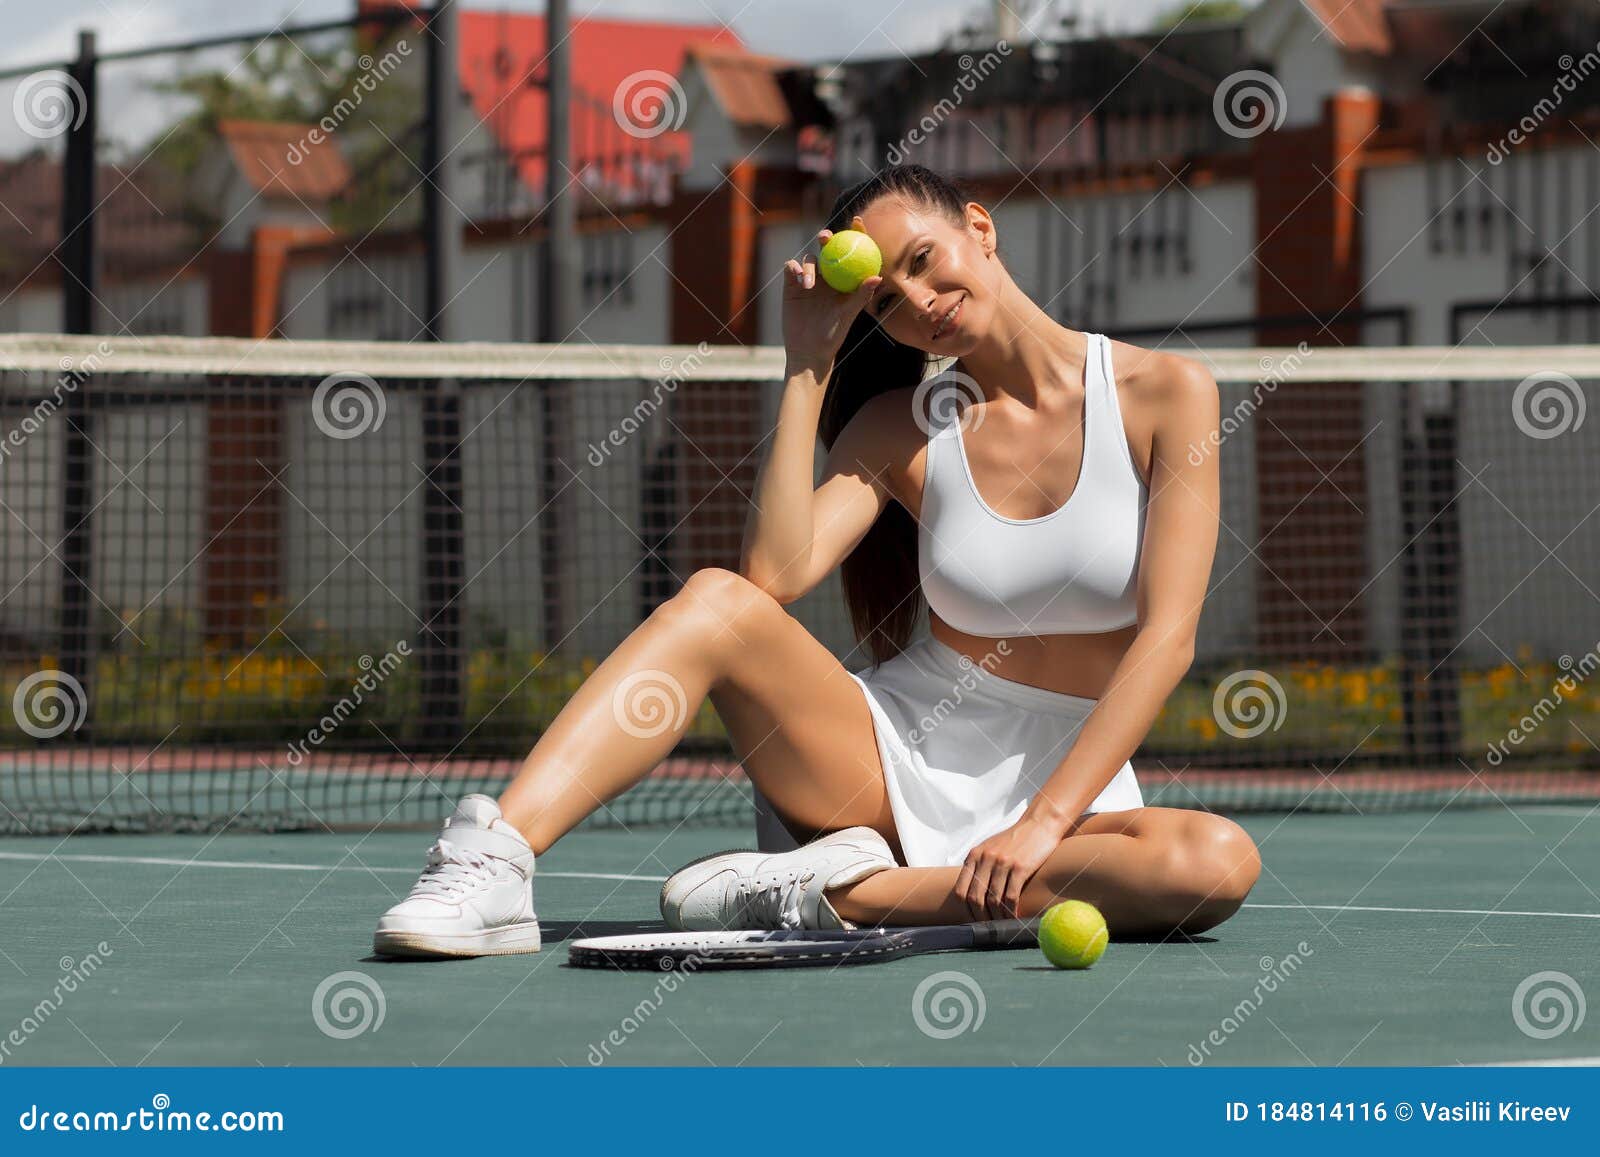 Alluring Adult Woman Sitting On Tennis Court In Sunlight Stock Photo